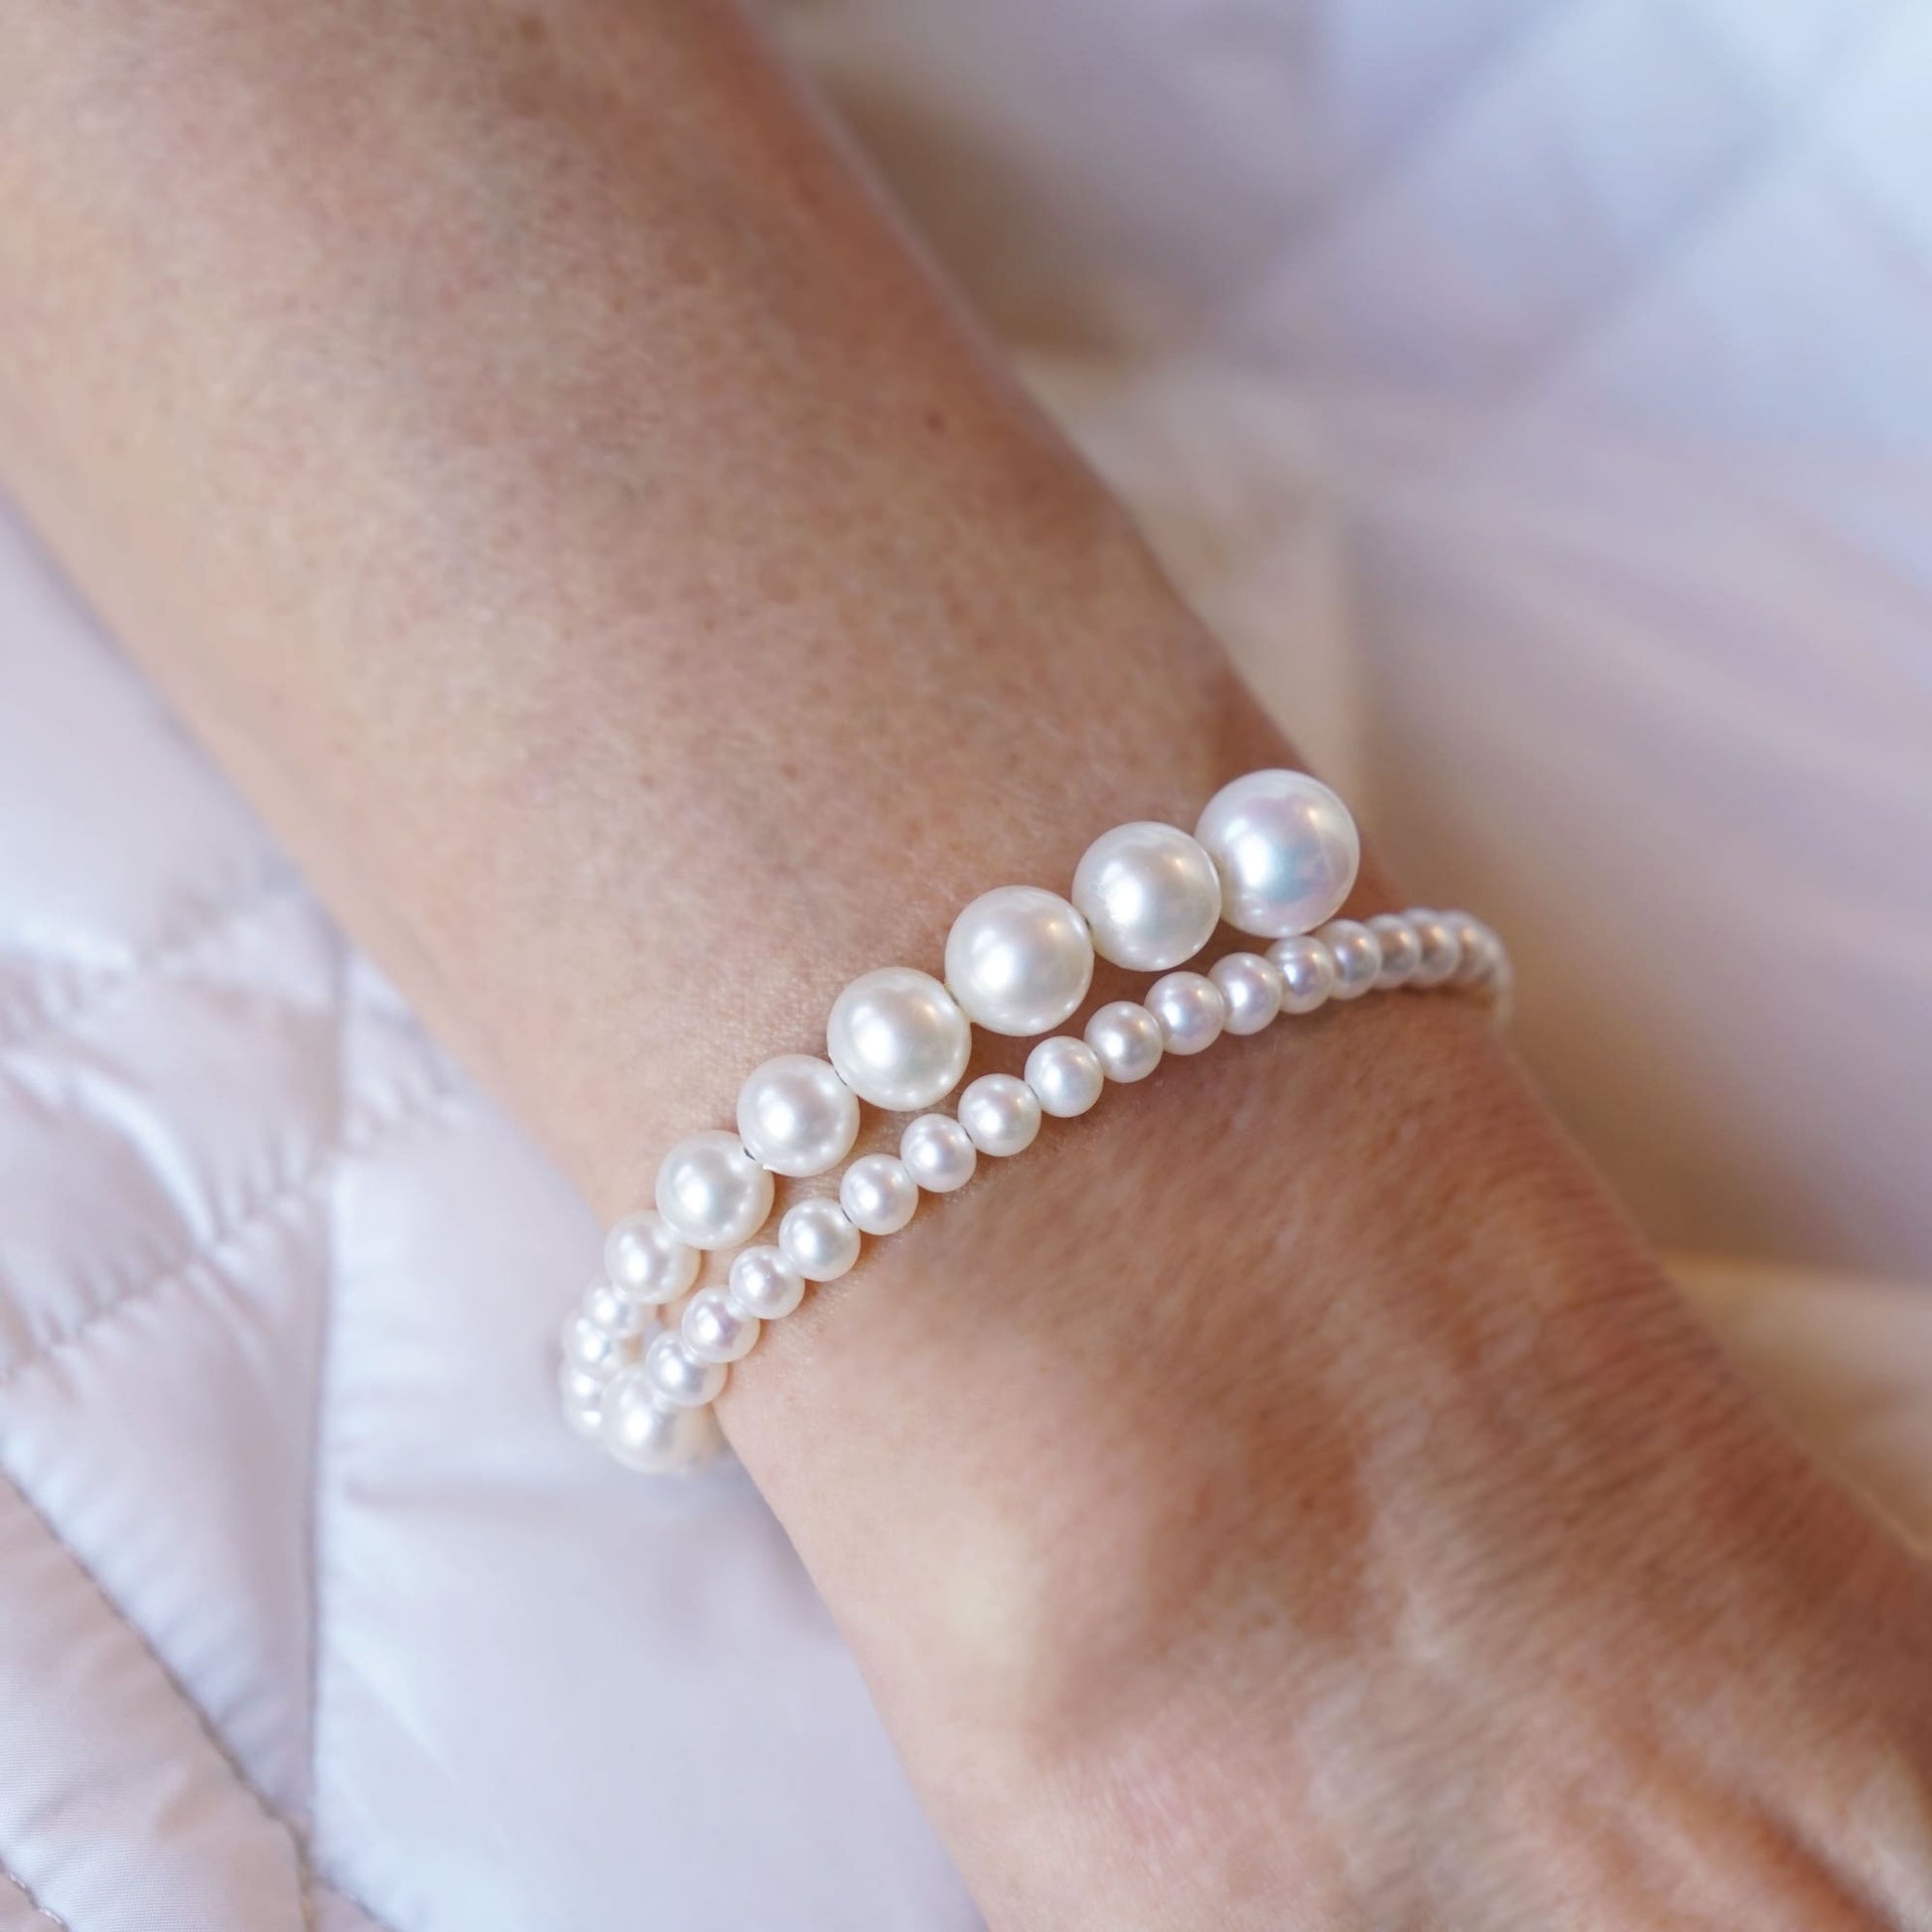 Elegant woman's hand adorned with a Spiral Pearl Bracelet, adding a touch of sophistication and glamour to any outfit.